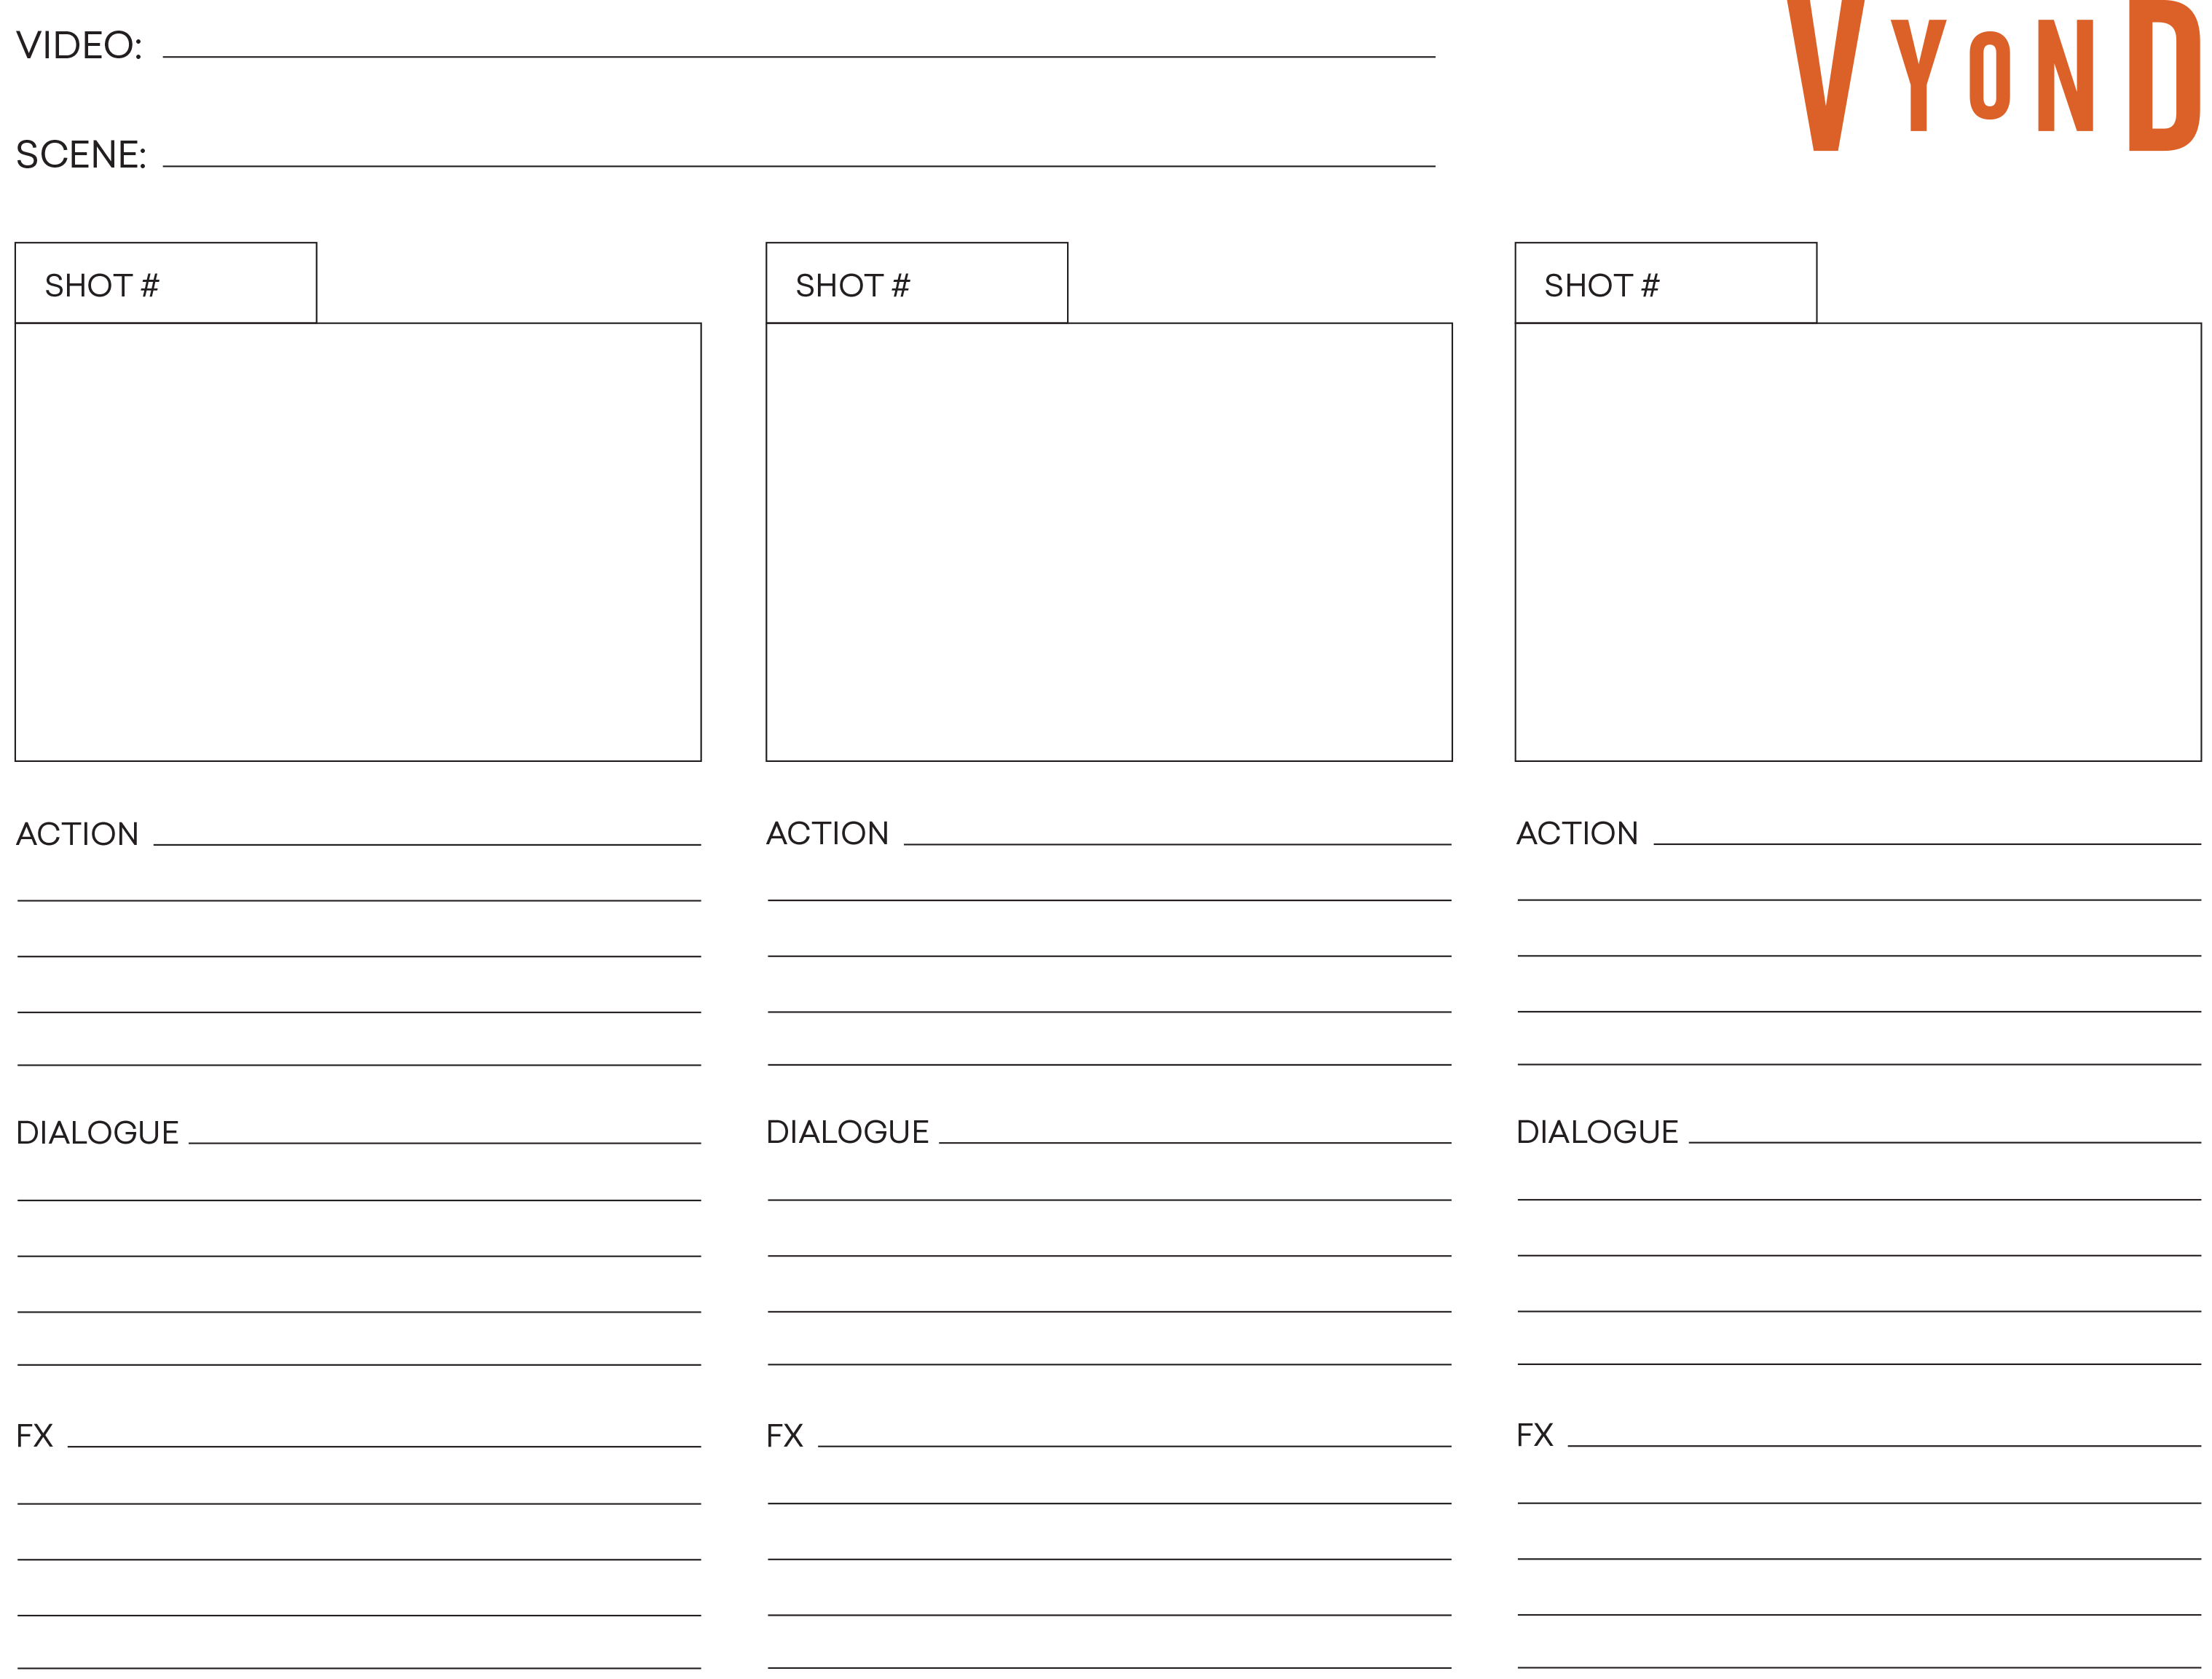 A blank template for filling in your own storyboard.